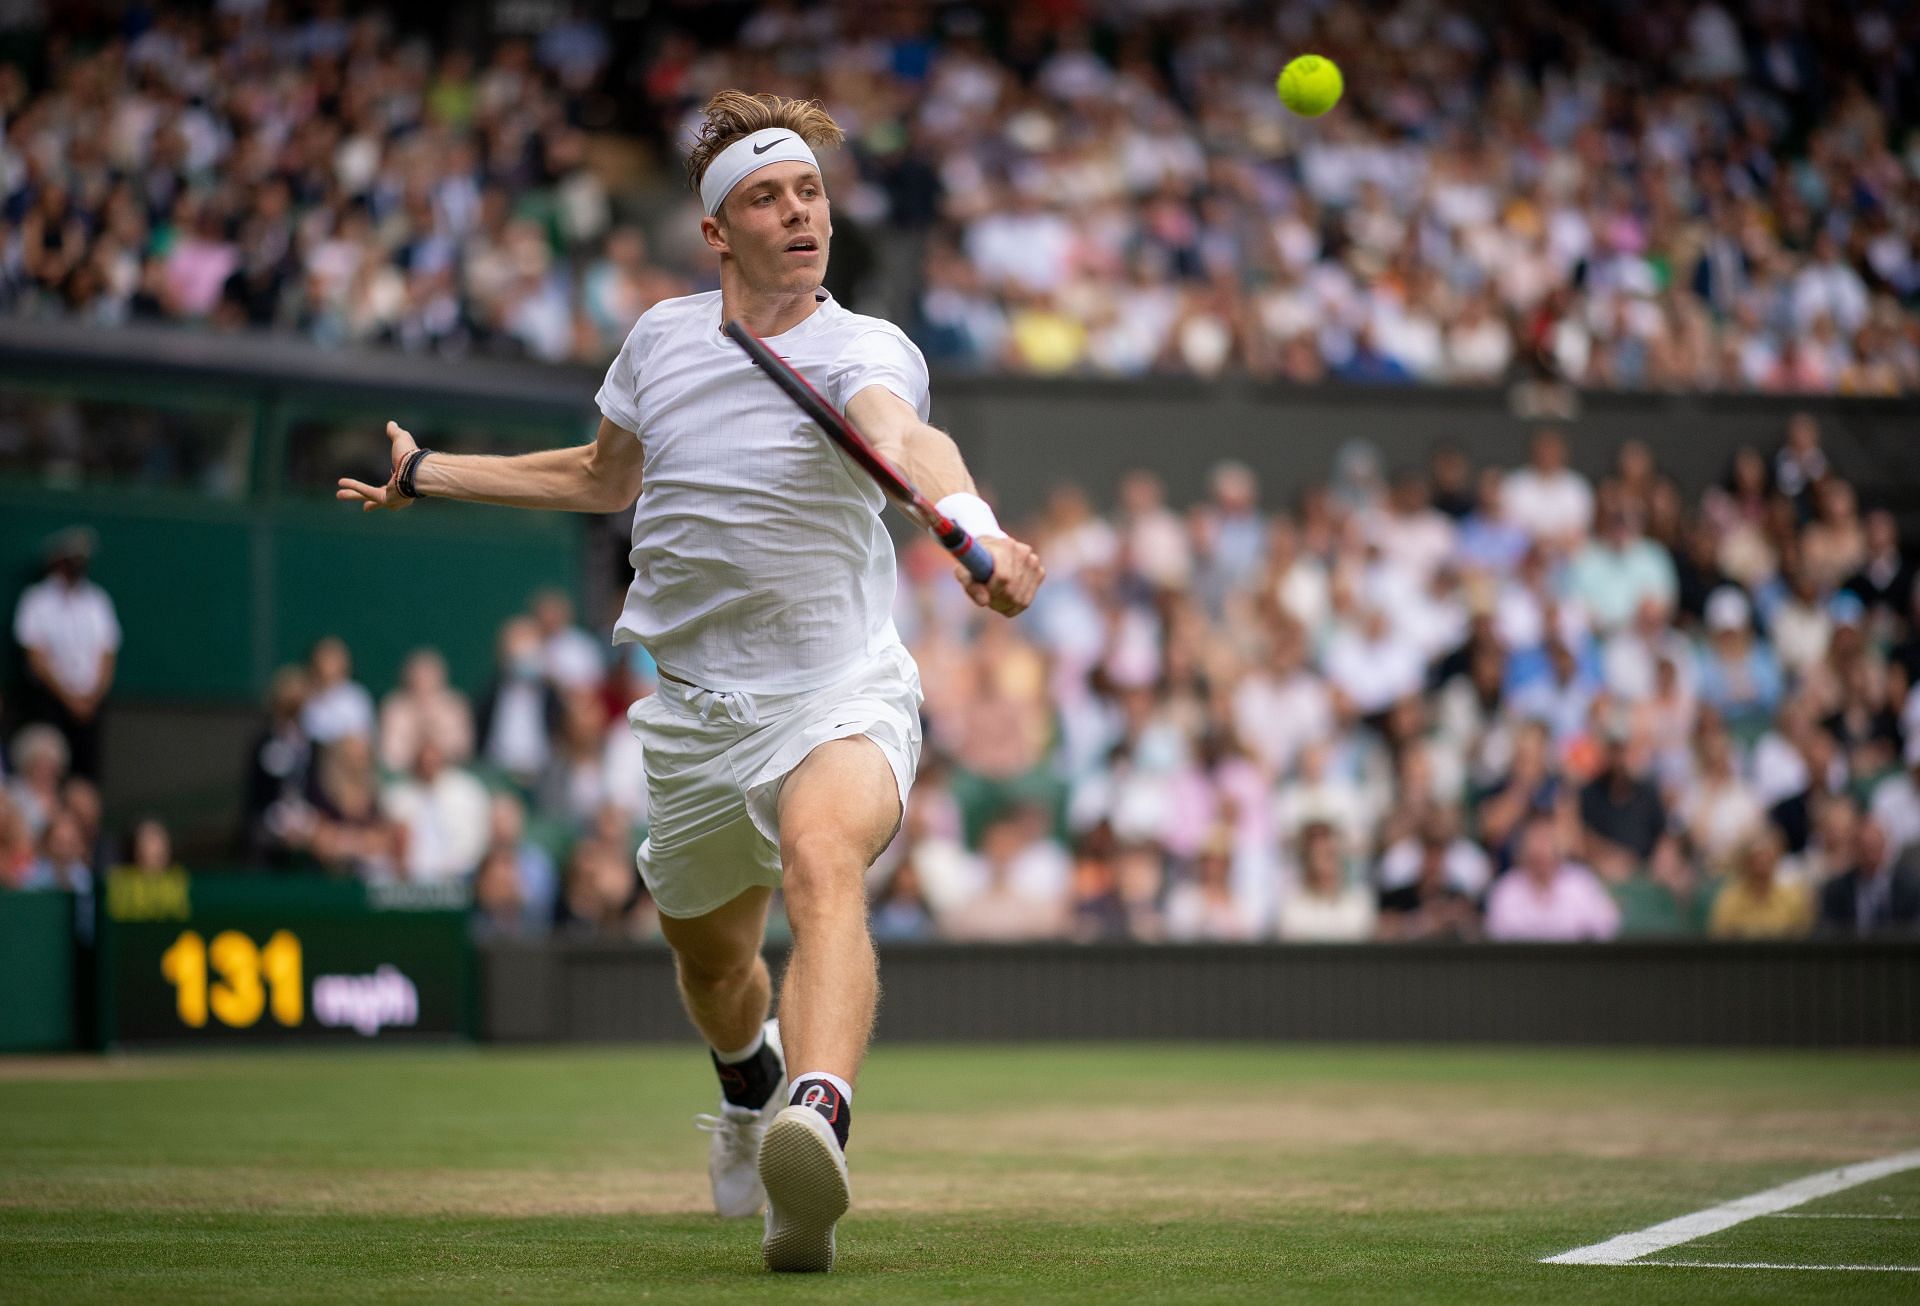 Denis Shapovalov reached a Major semifinal for the first time at Wimbledon last year